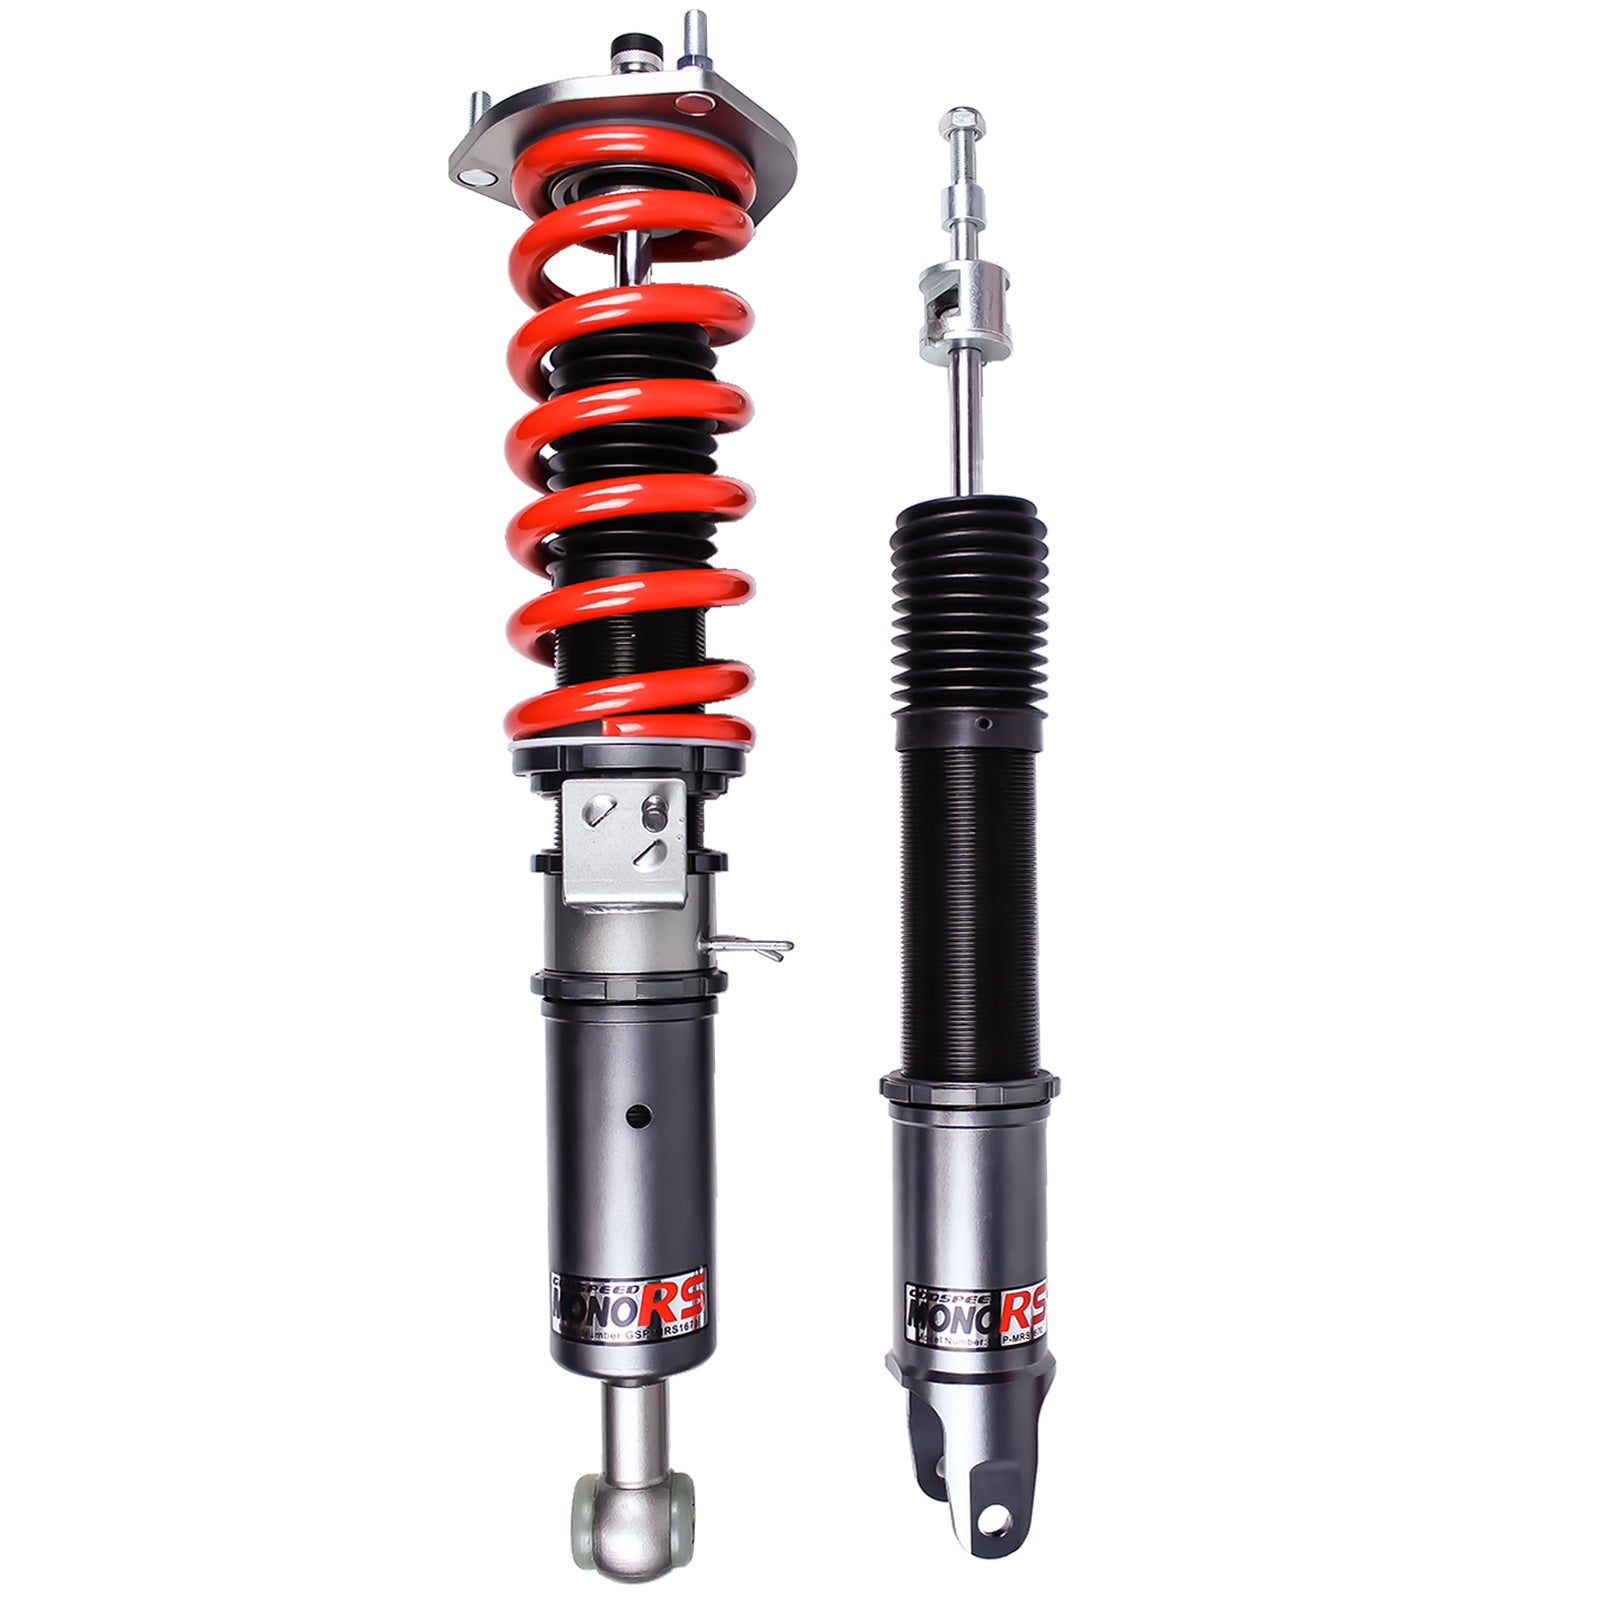 Godspeed MRS1670-C MonoRS Coilover Lowering Kit, 32 Damping Adjustment, Ride Height Adjustable